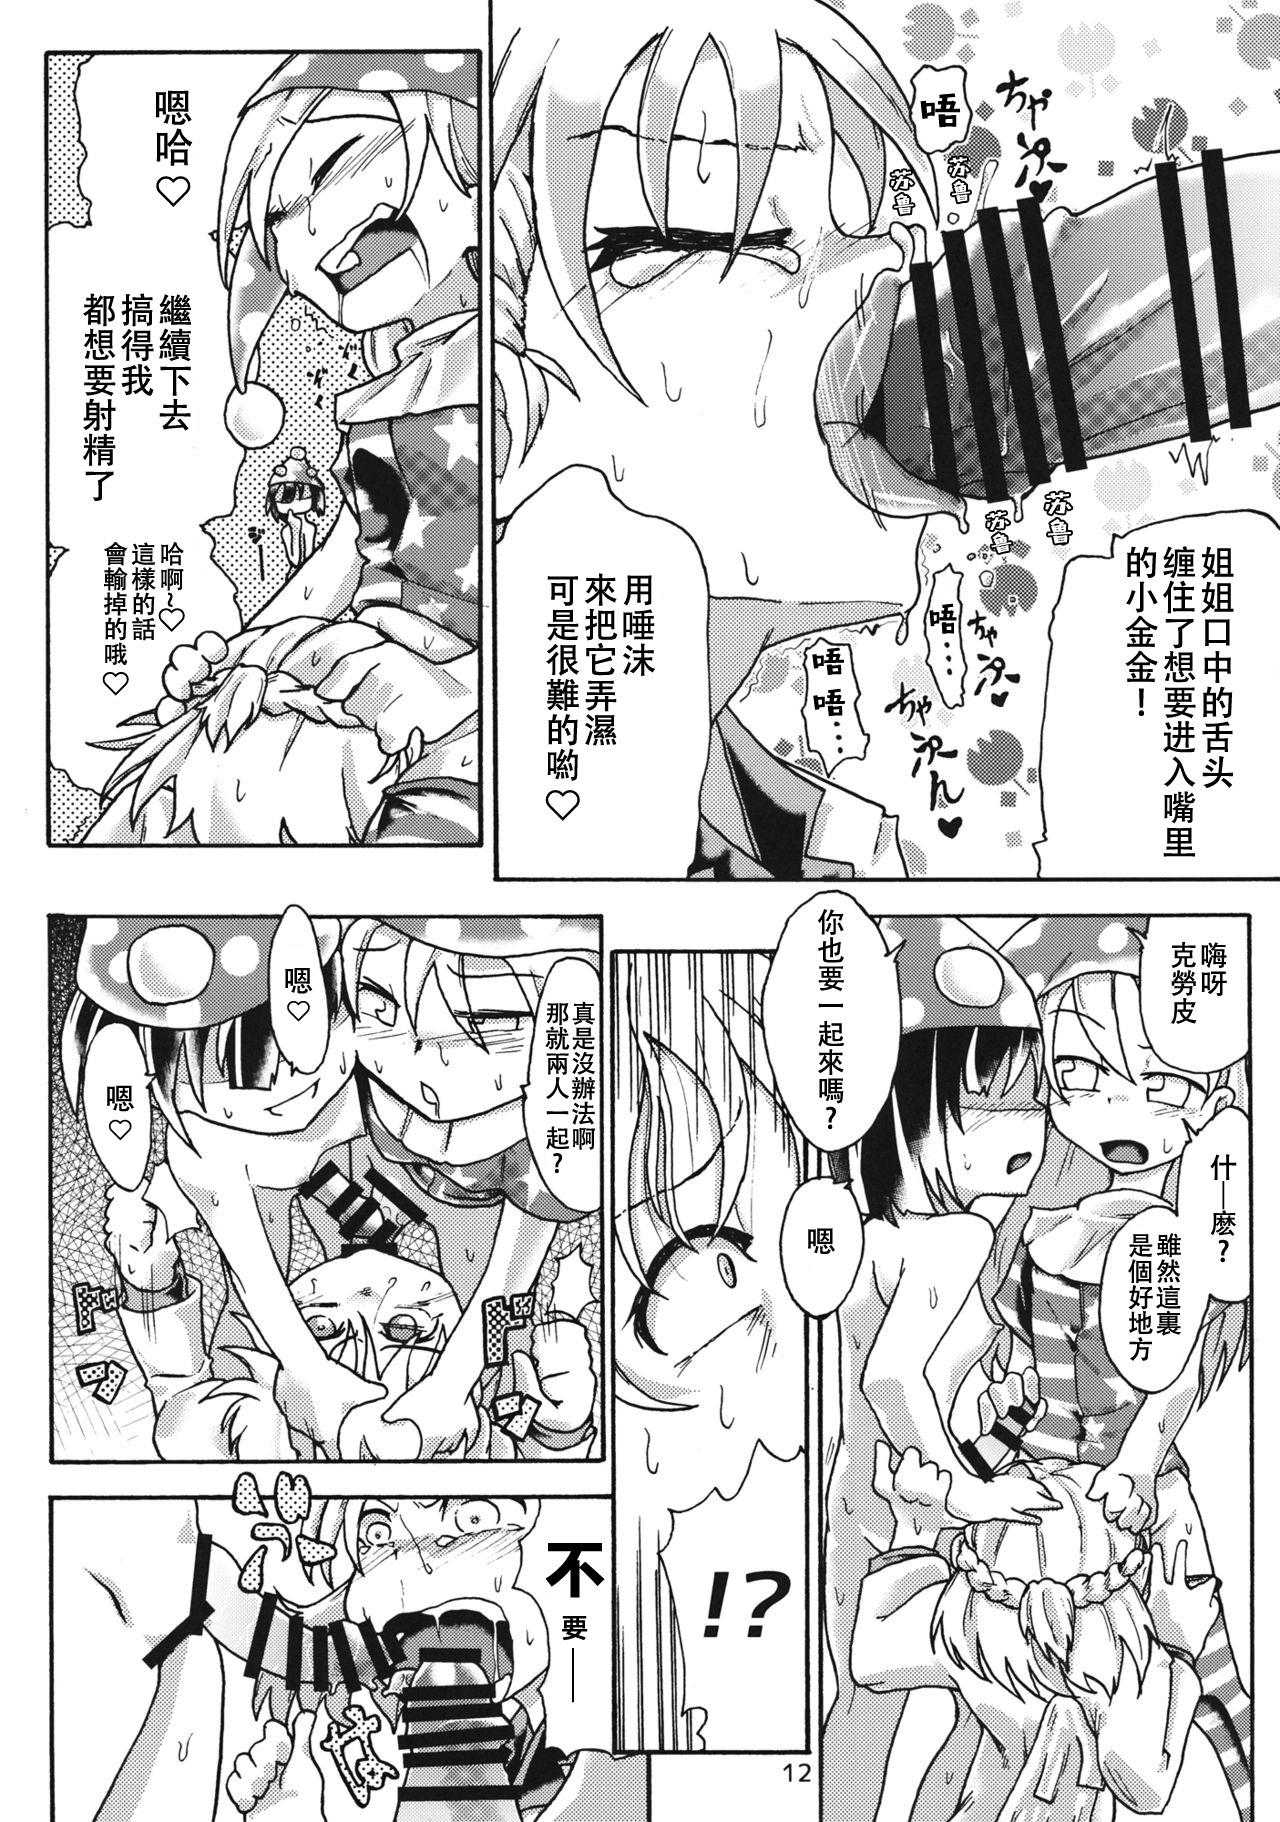 Lick Creeping! - Touhou project Web Cam - Page 11